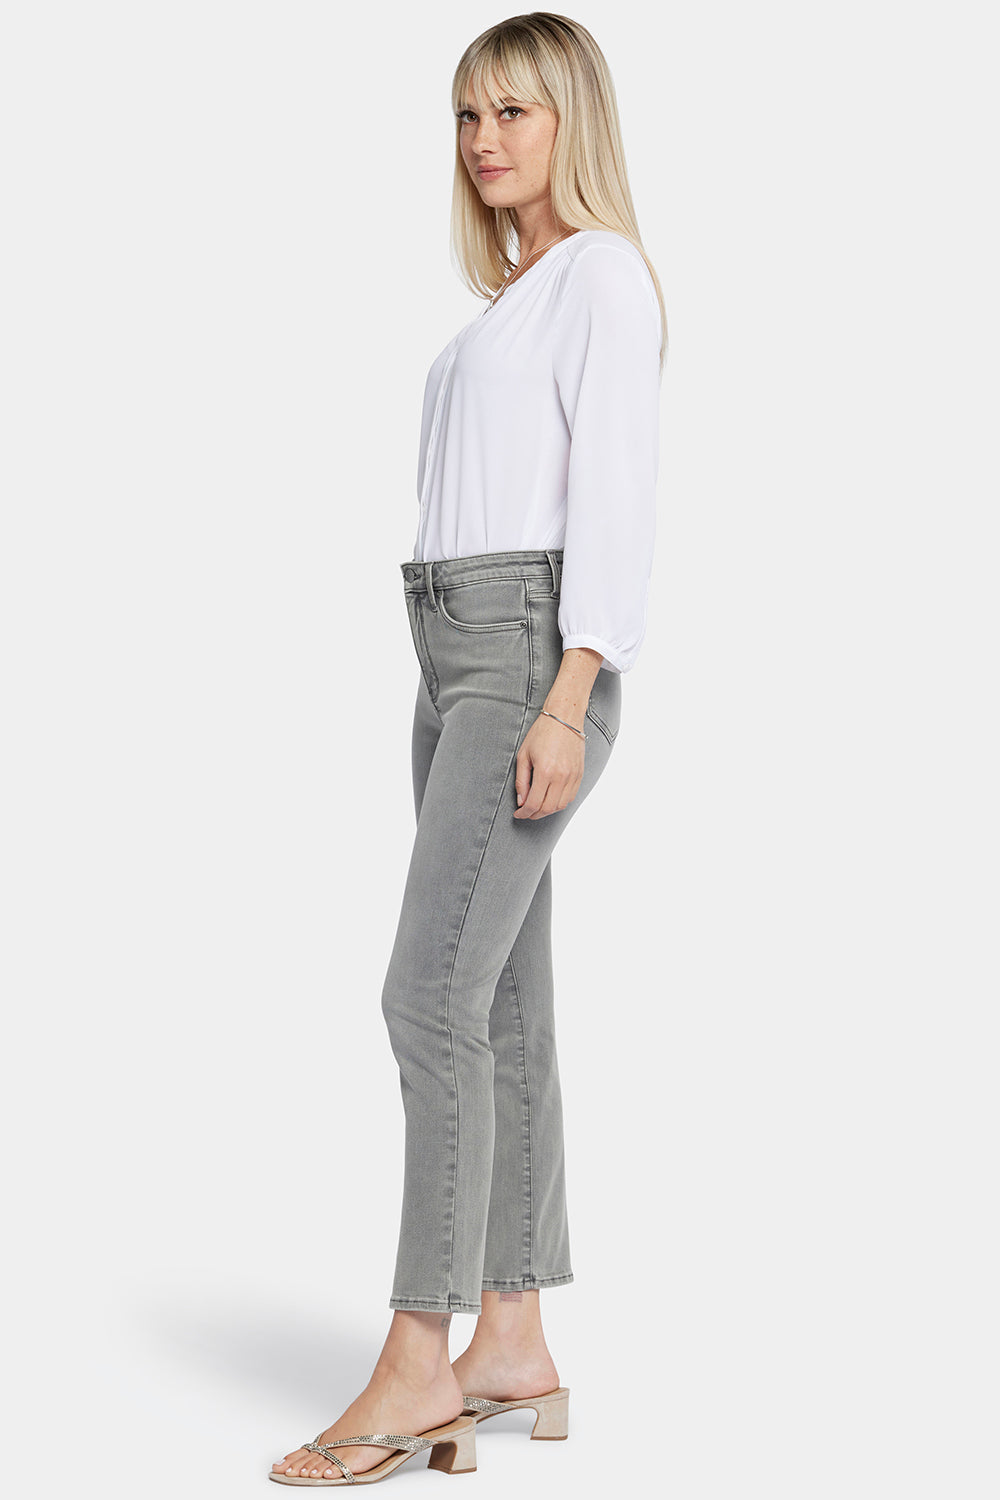 NYDJ Curve Shaper™ Sheri Slim Ankle Jeans With High Rise - Island Pines